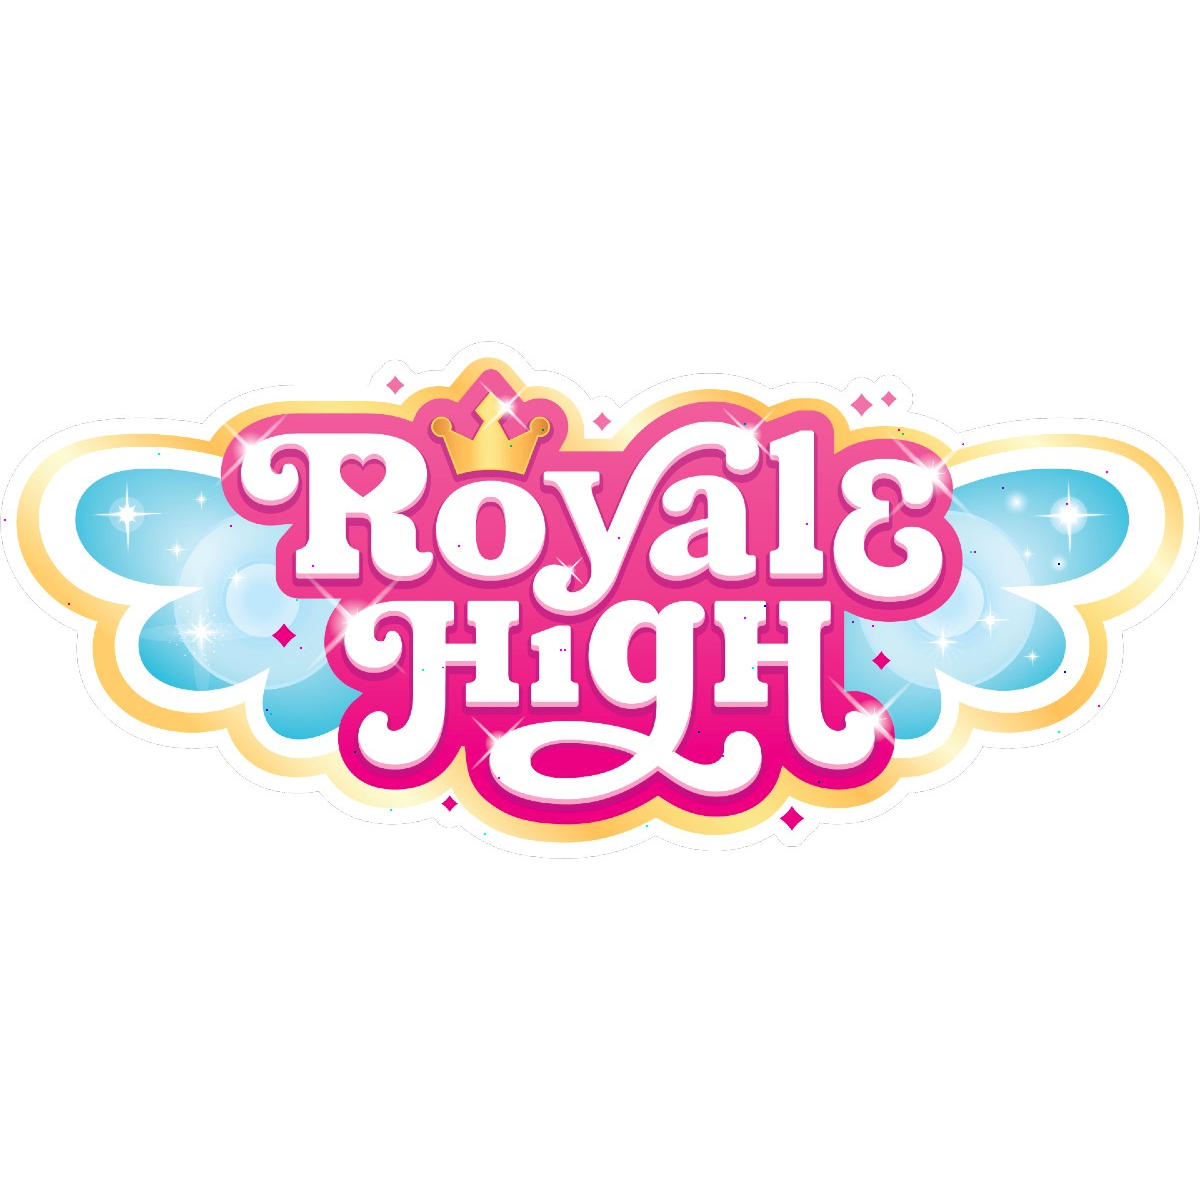  Jazwares Named Master Toy Licensee for Hit Metaverse Game Royale High